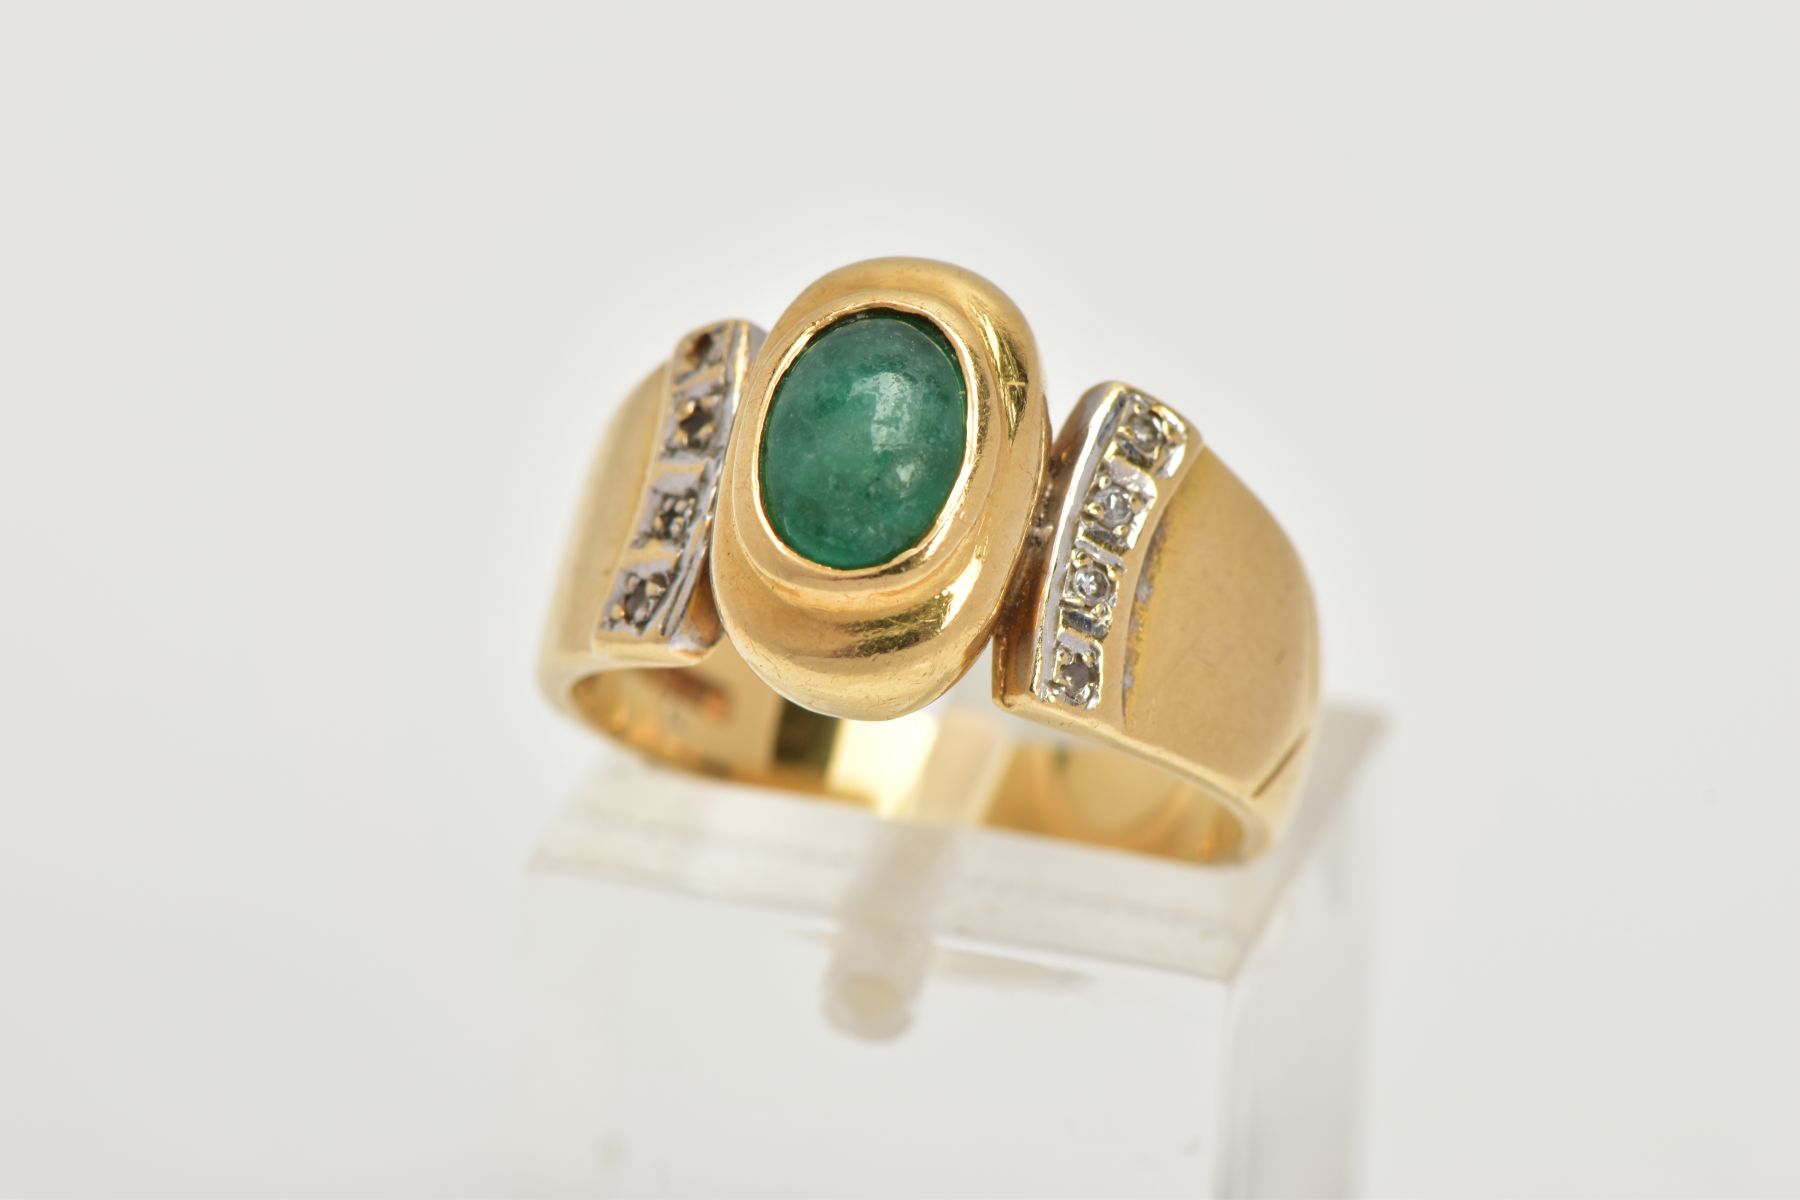 AN 18CT GOLD EMERALD AND DIAMOND RING, an oval cabochon emerald stone, approximate dimensions length